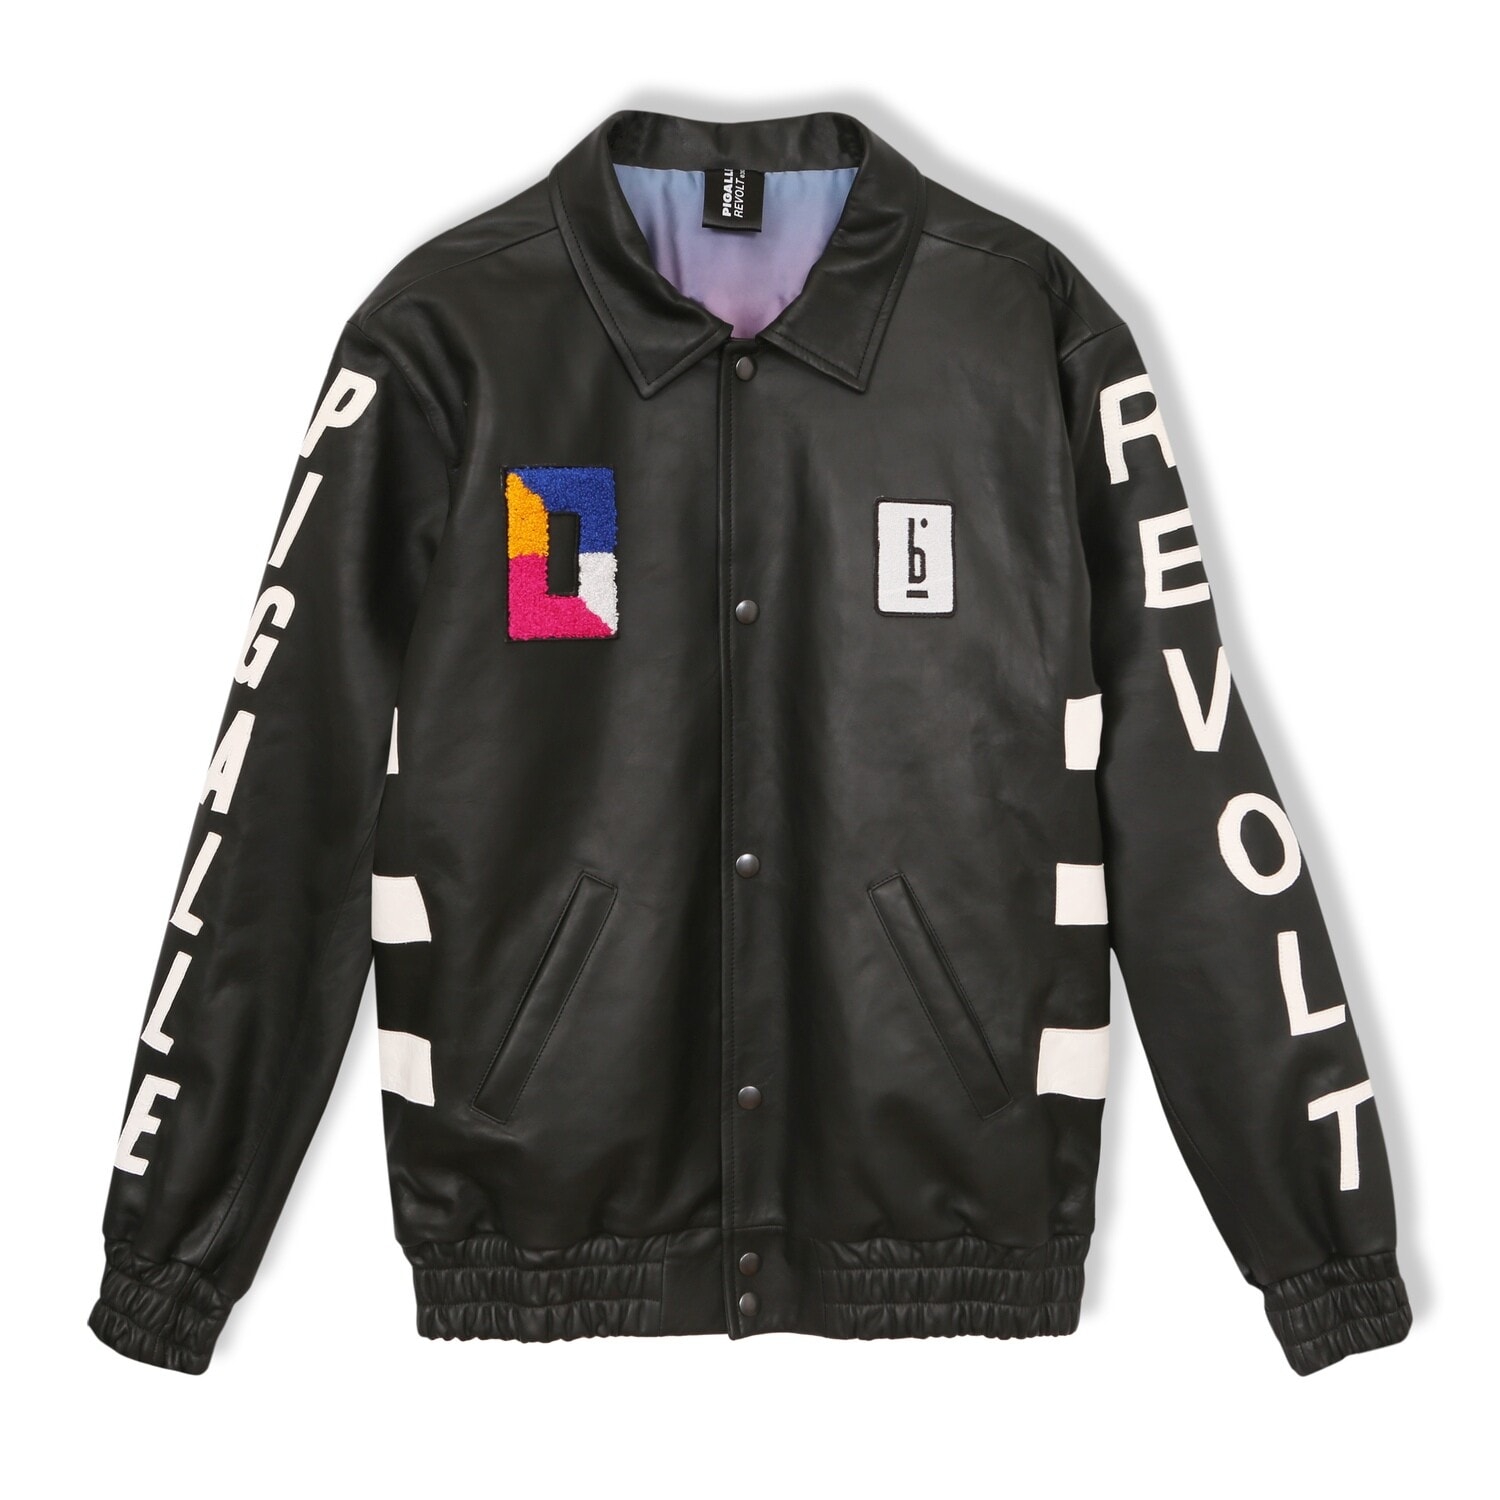 PIGALLE「STYLE IN REVOLT」专属限定系列发布